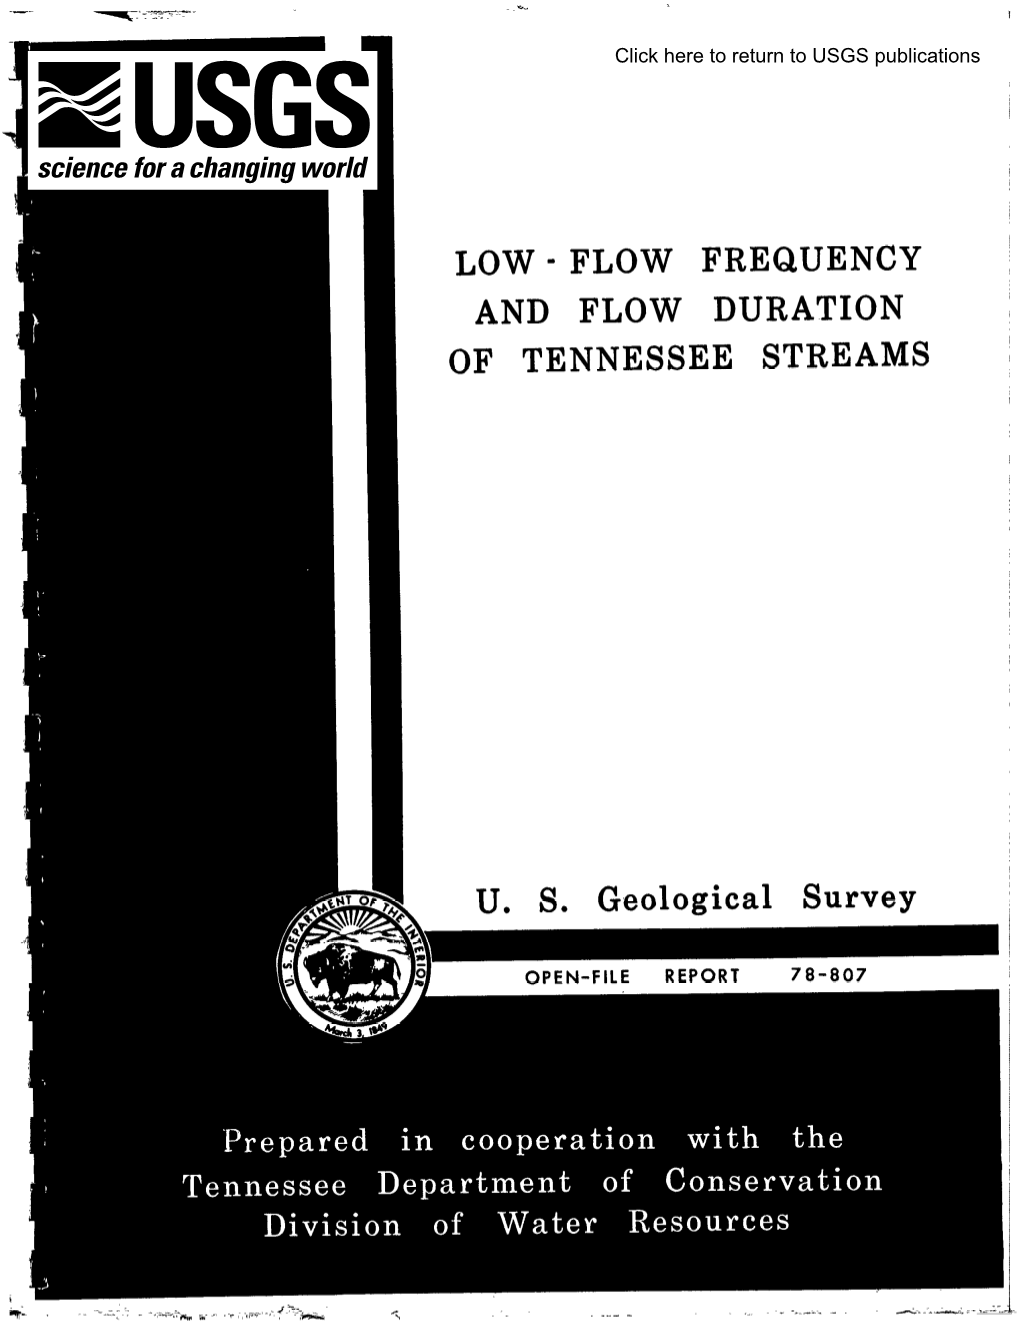 Low - Flow Frequency and Flow Duration of Tennessee Streams